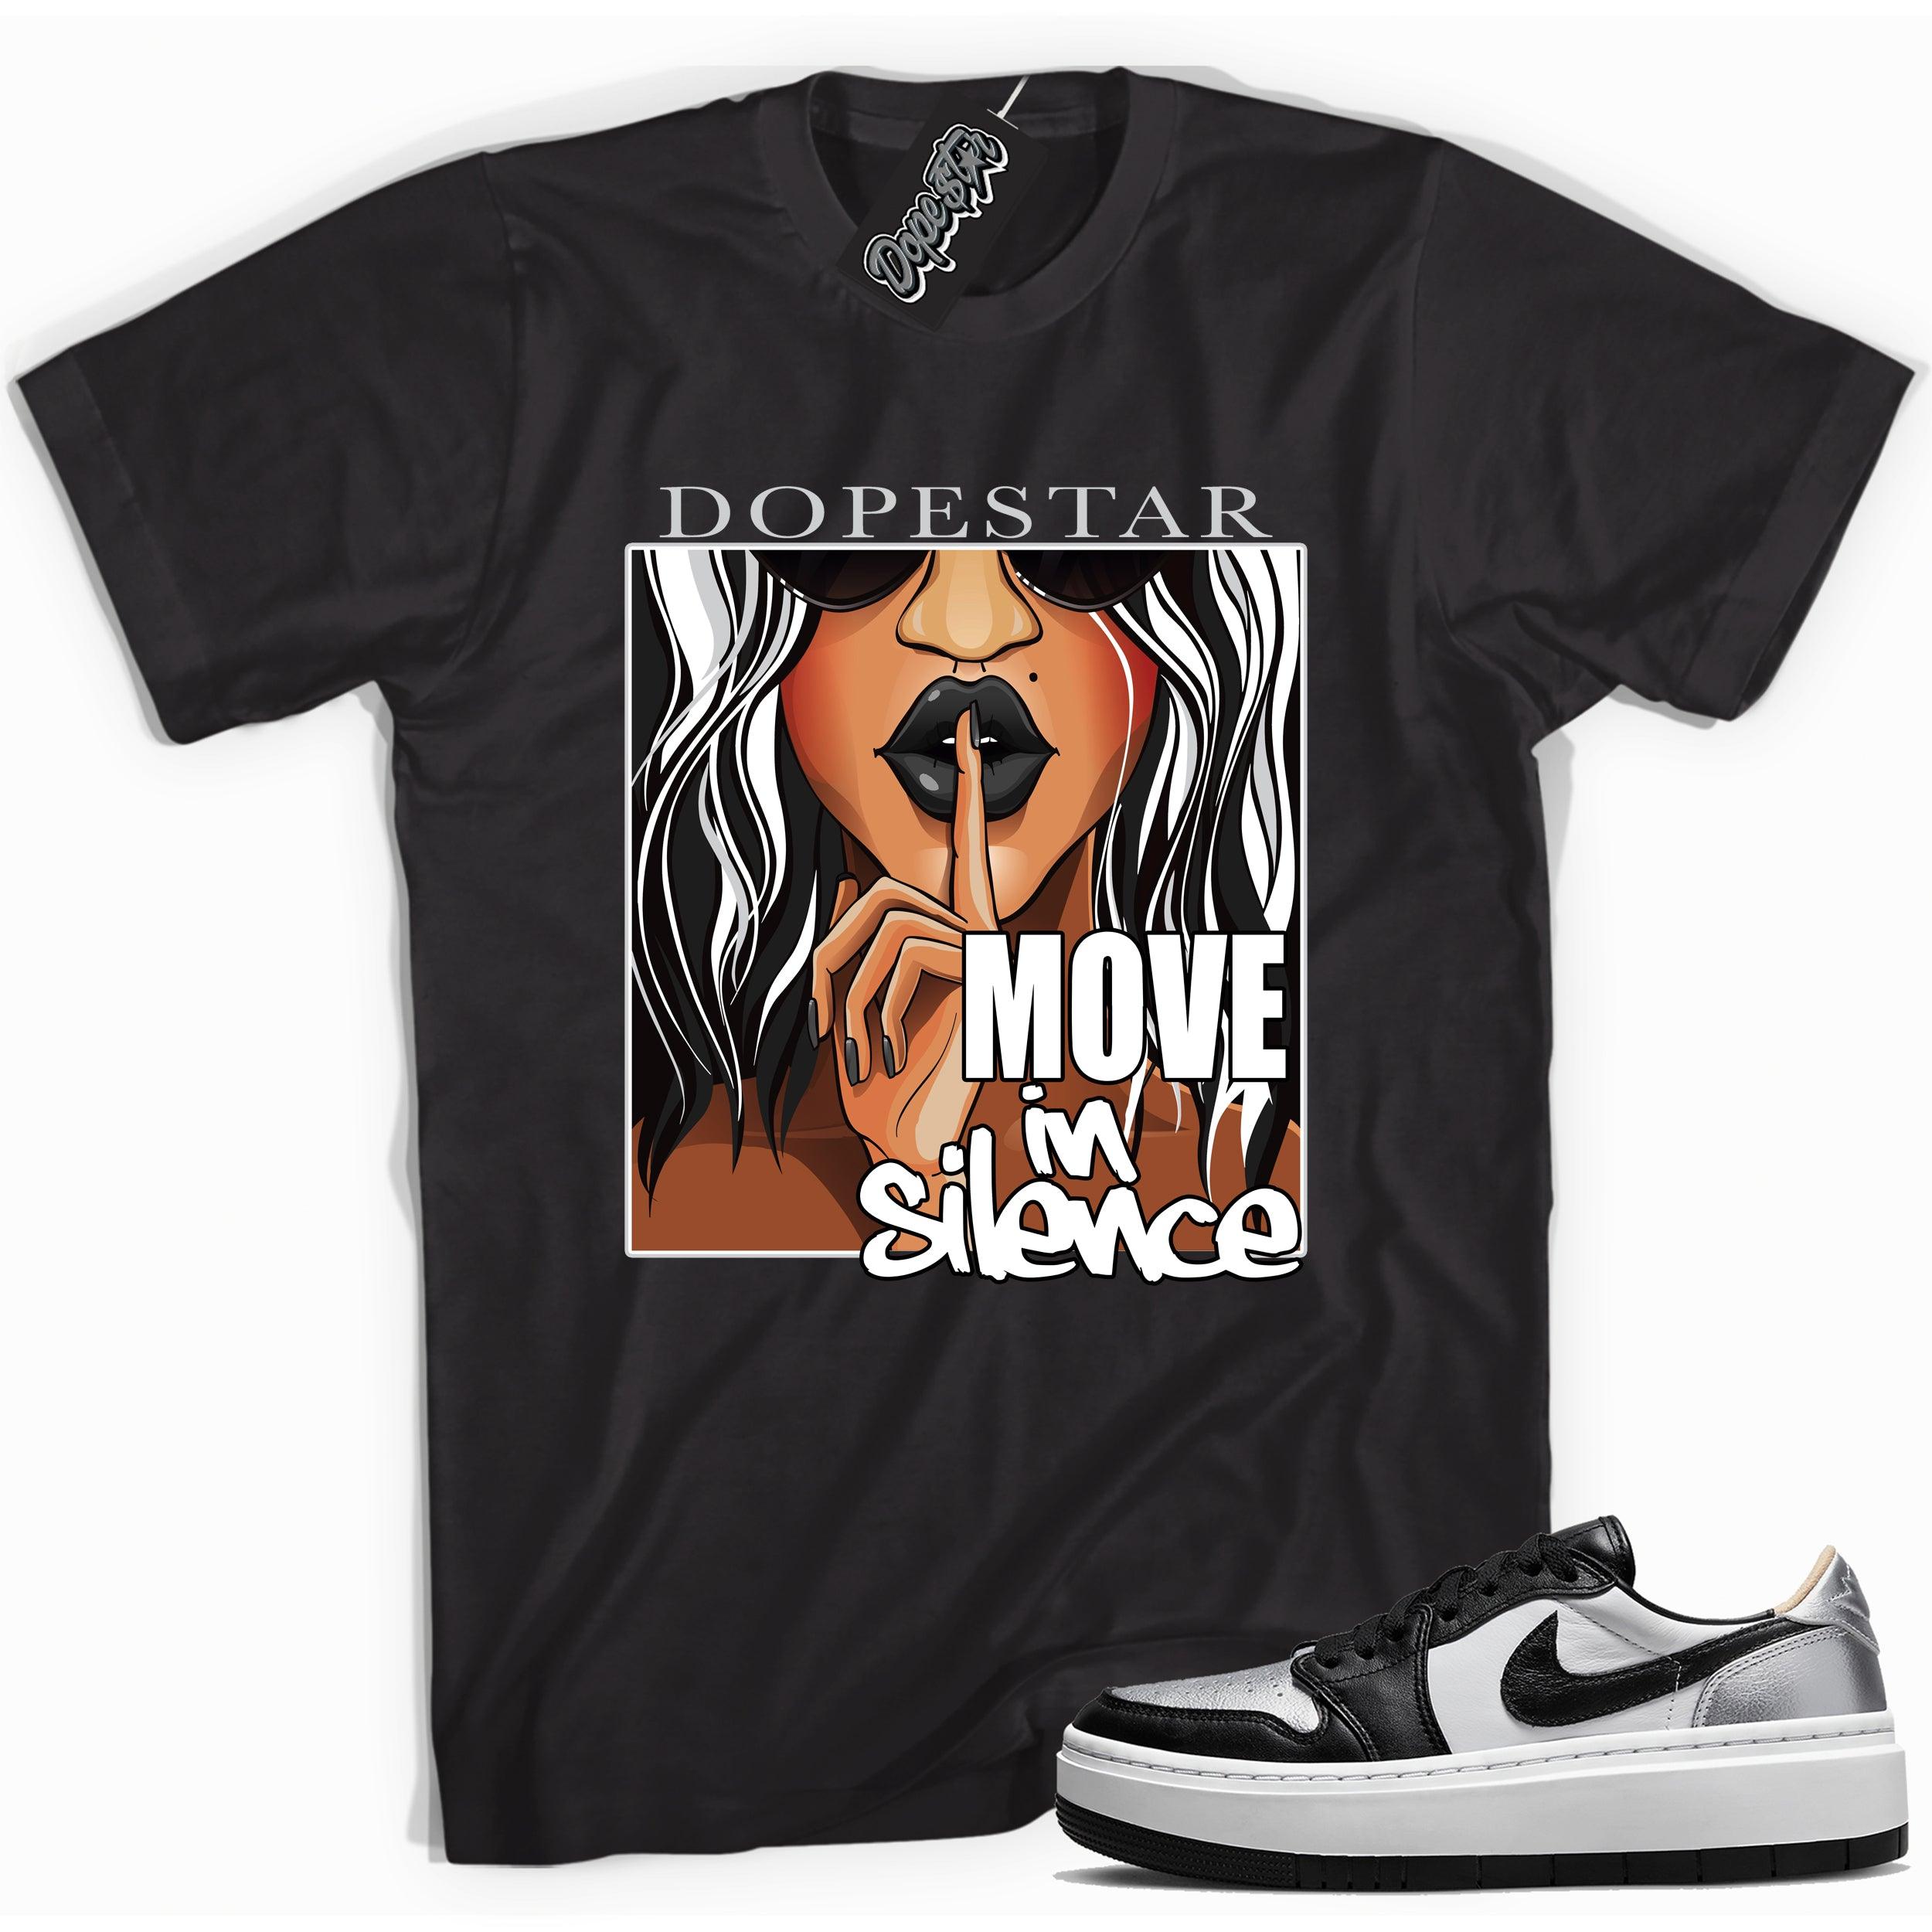 Cool black graphic tee with 'move in silence' print, that perfectly matches Air Jordan 1 Elevate Low SE Silver Toe sneakers.